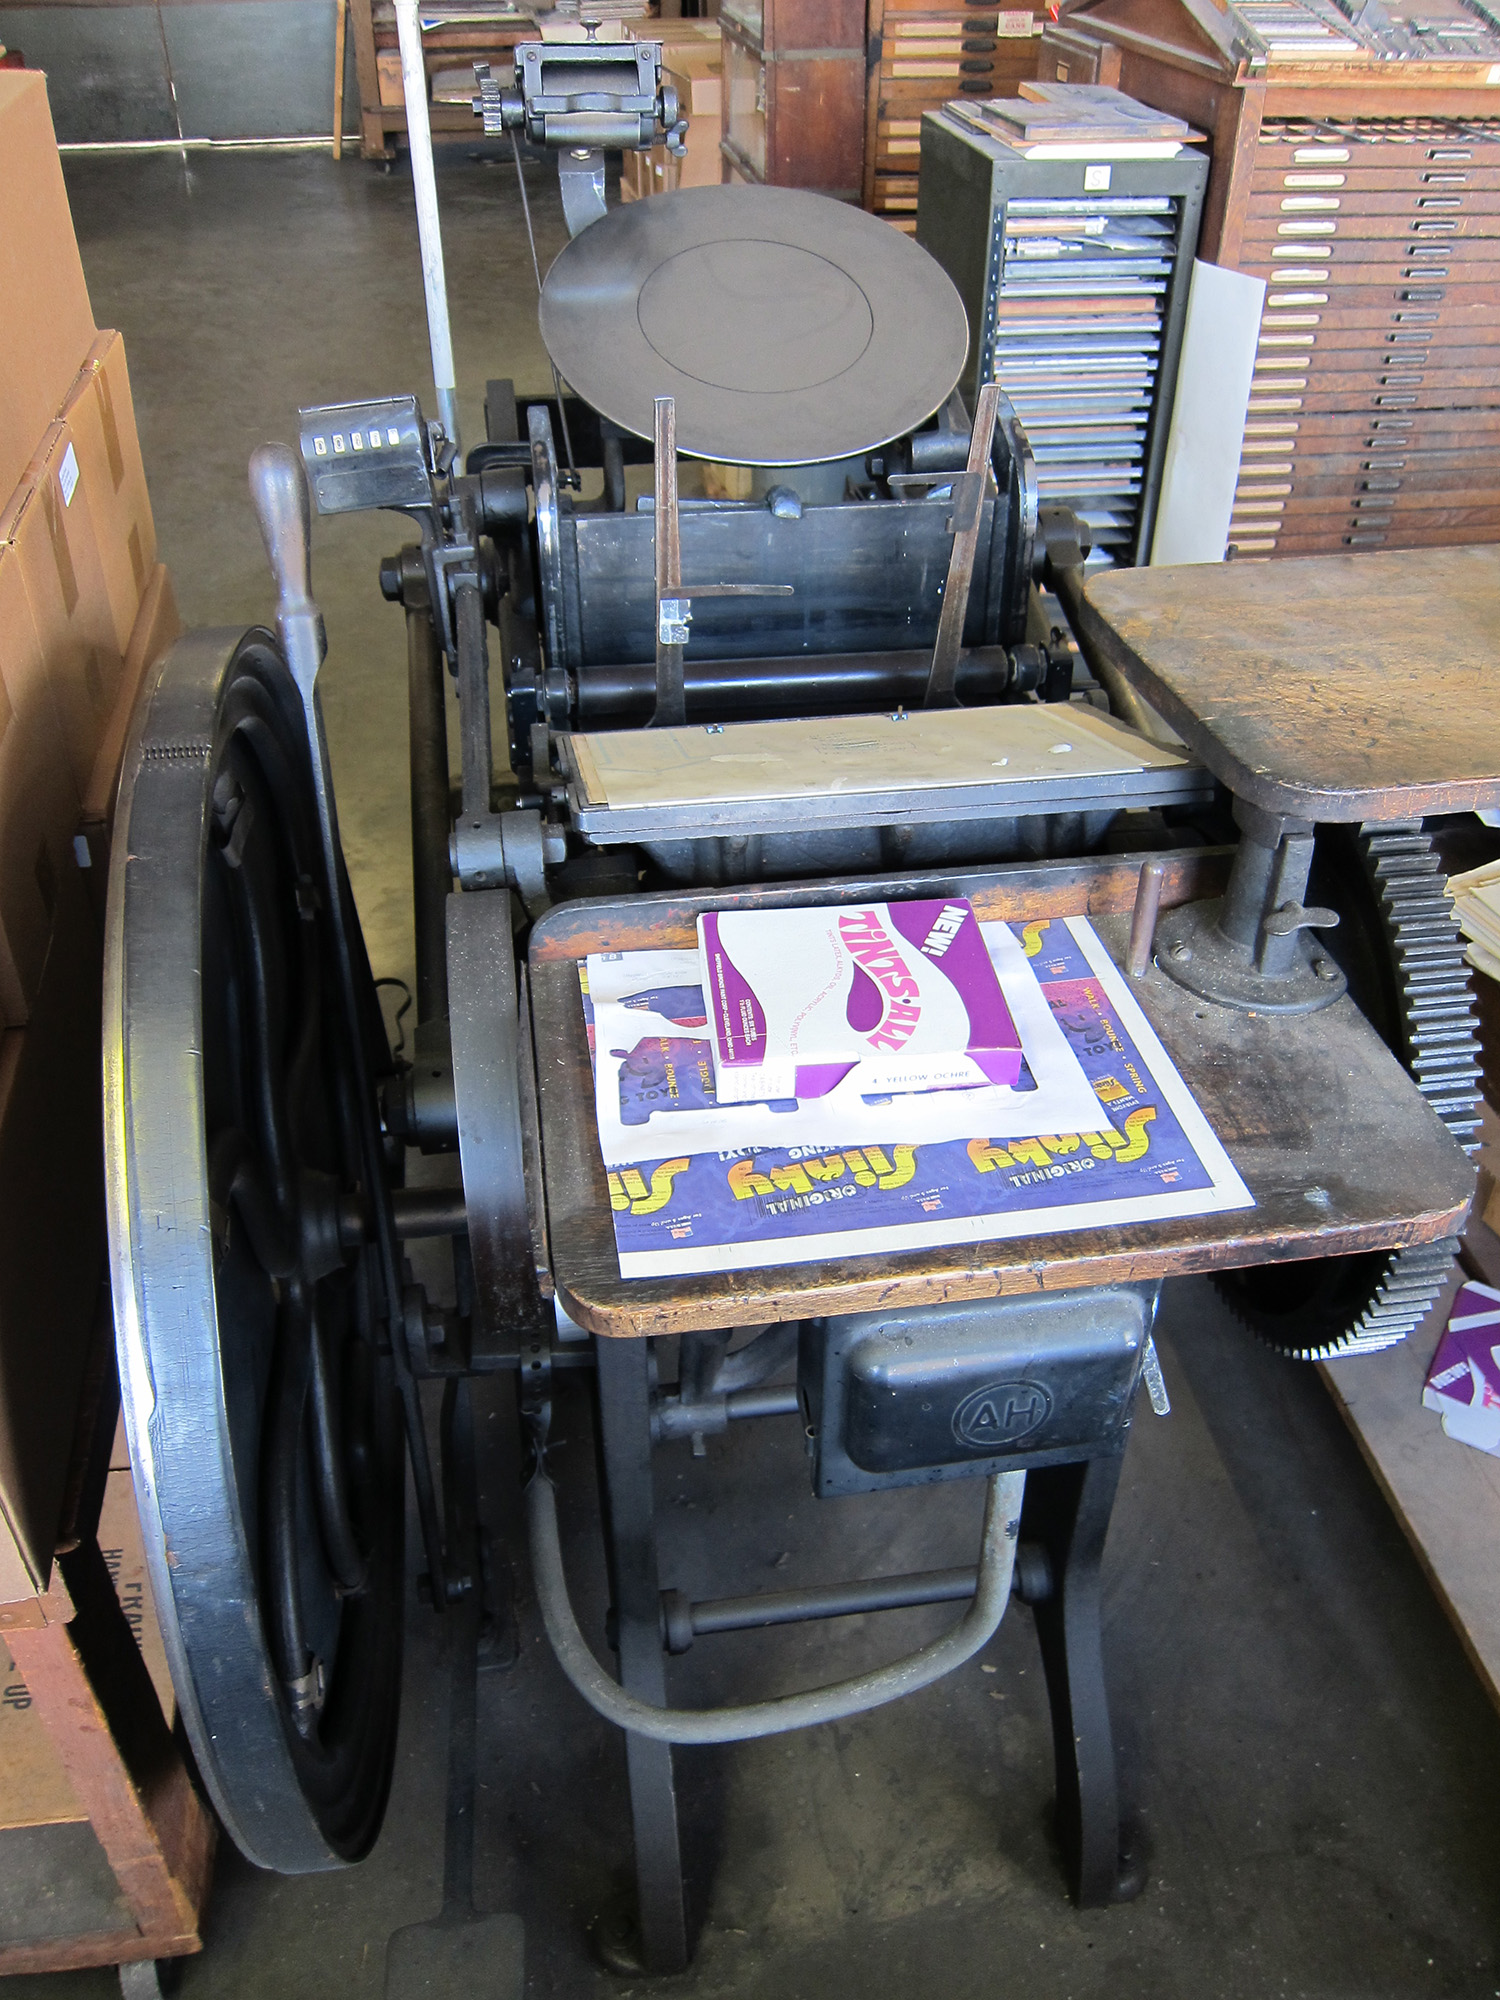  Hand-fed motorized Chandler &amp; Price 8x12 old-style press, my great-grandfather's first 